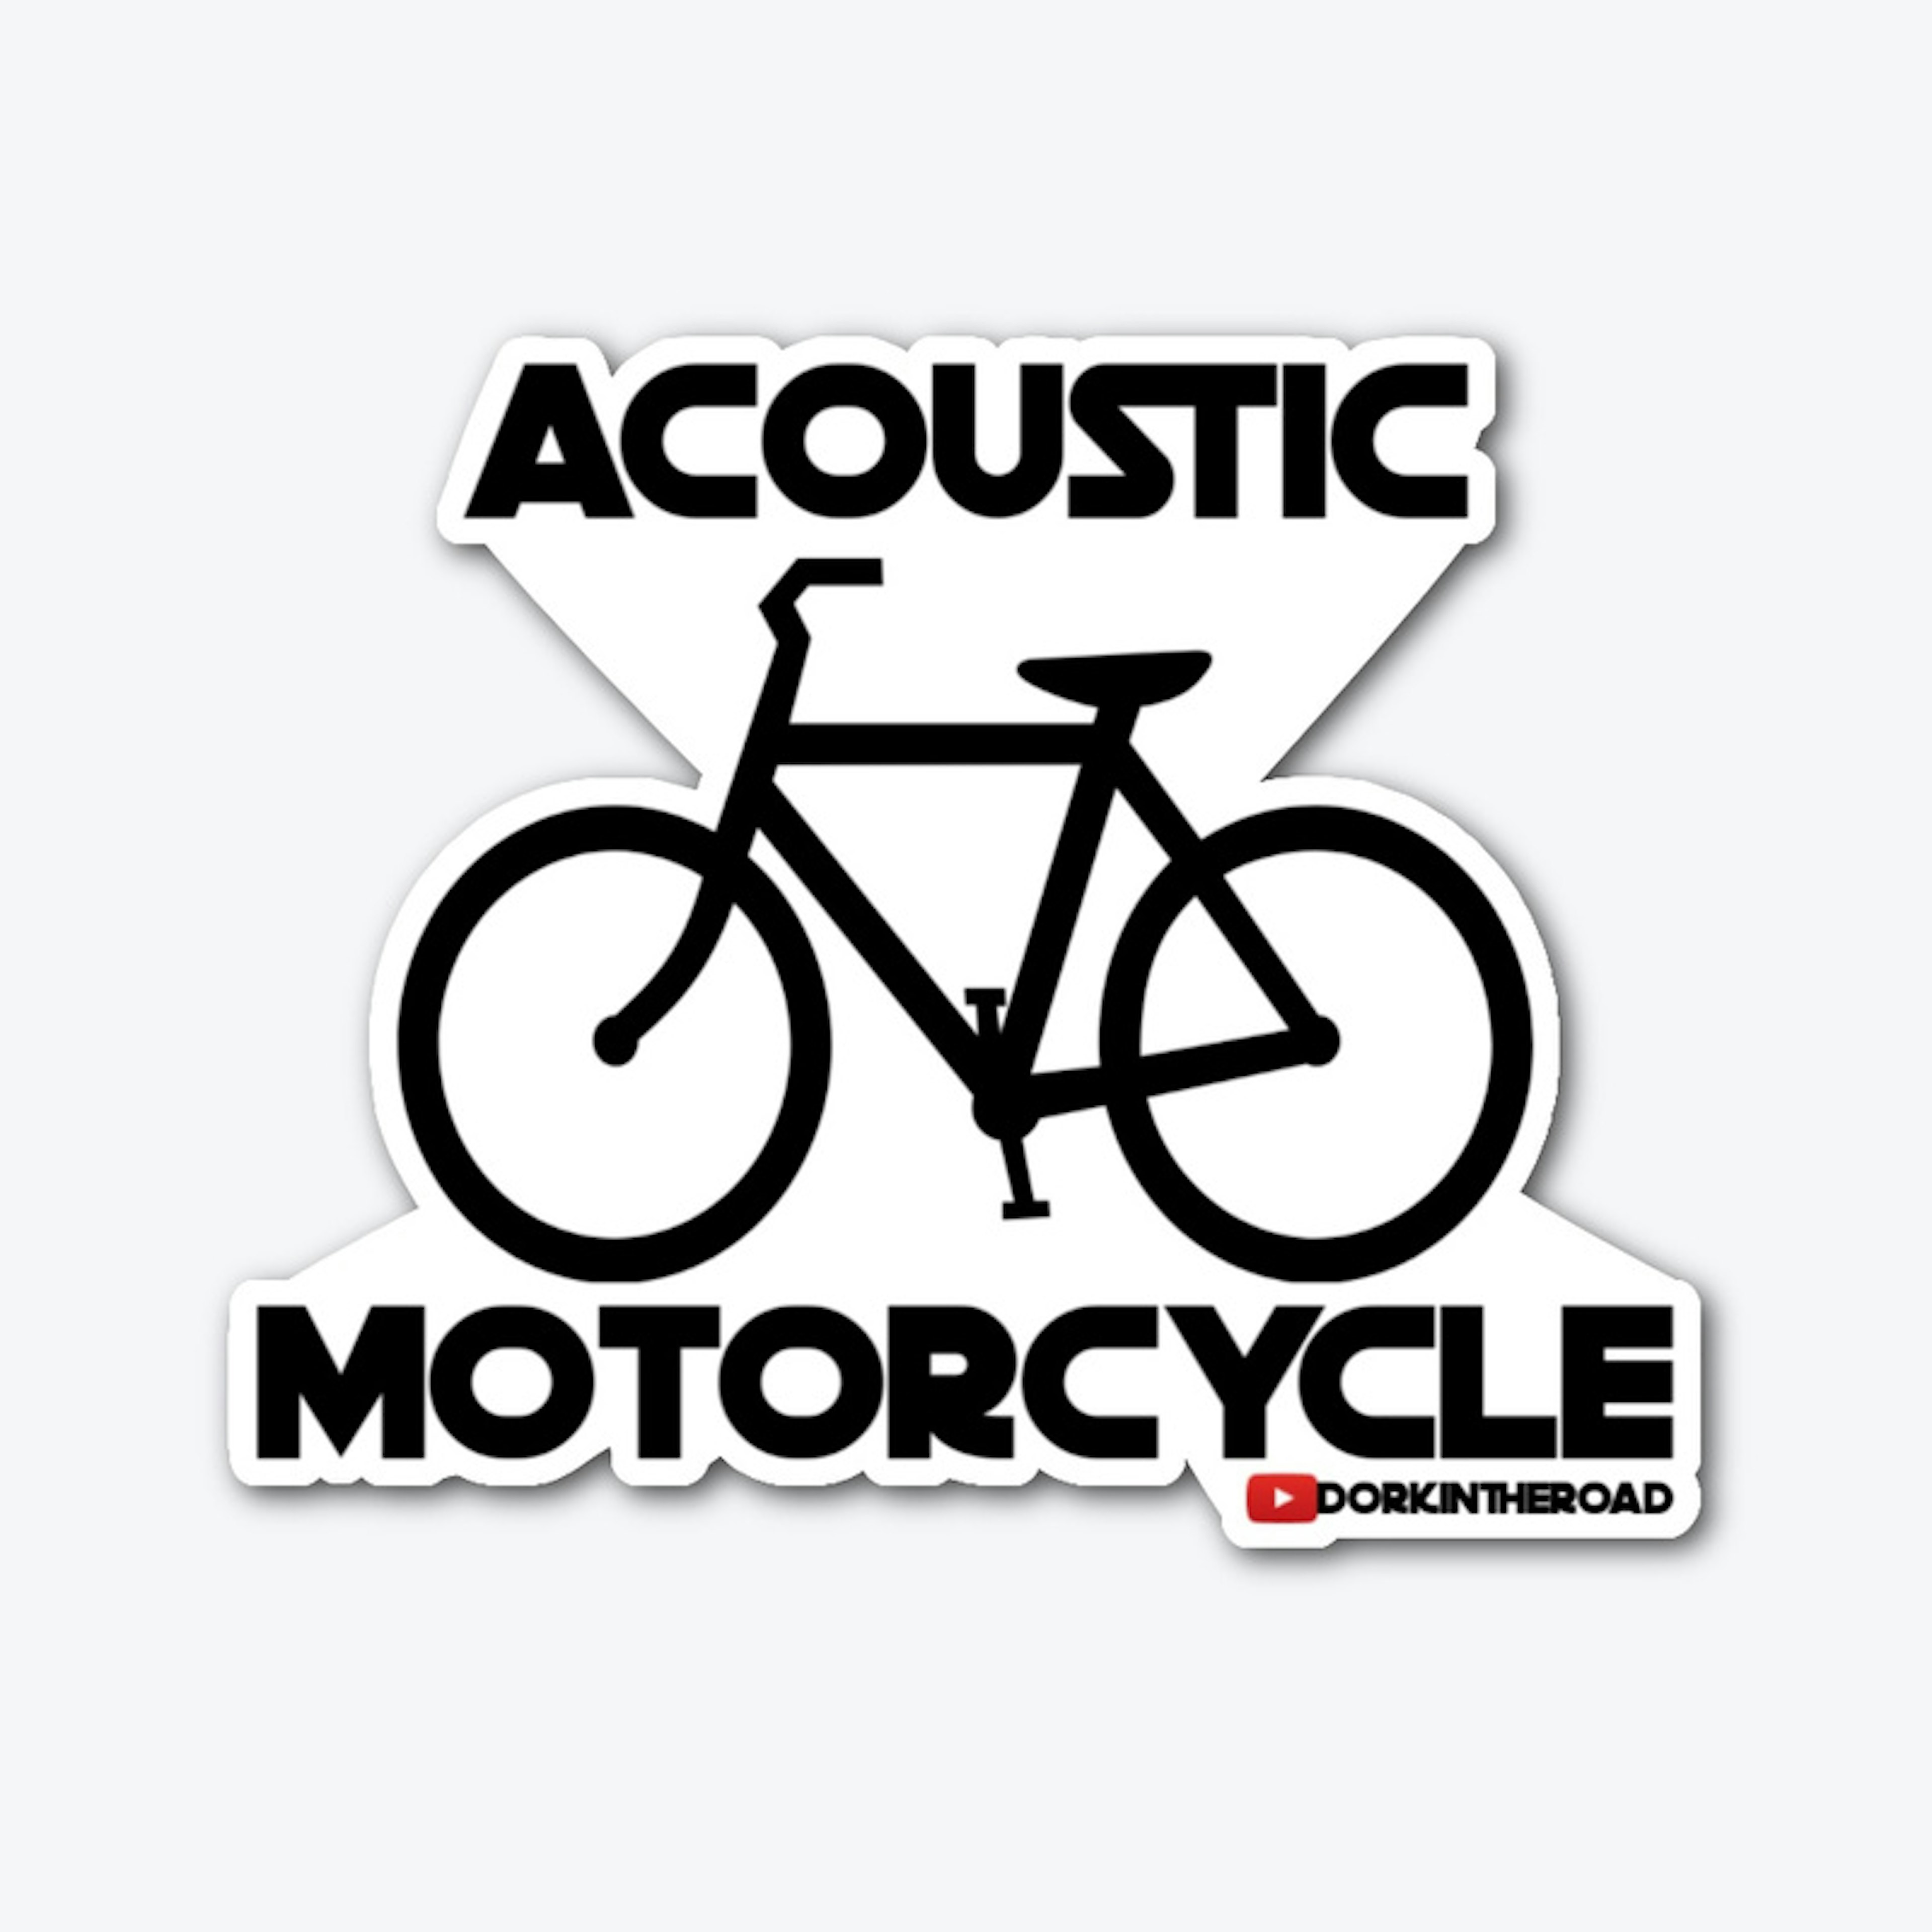 Acoustic Motorcycle